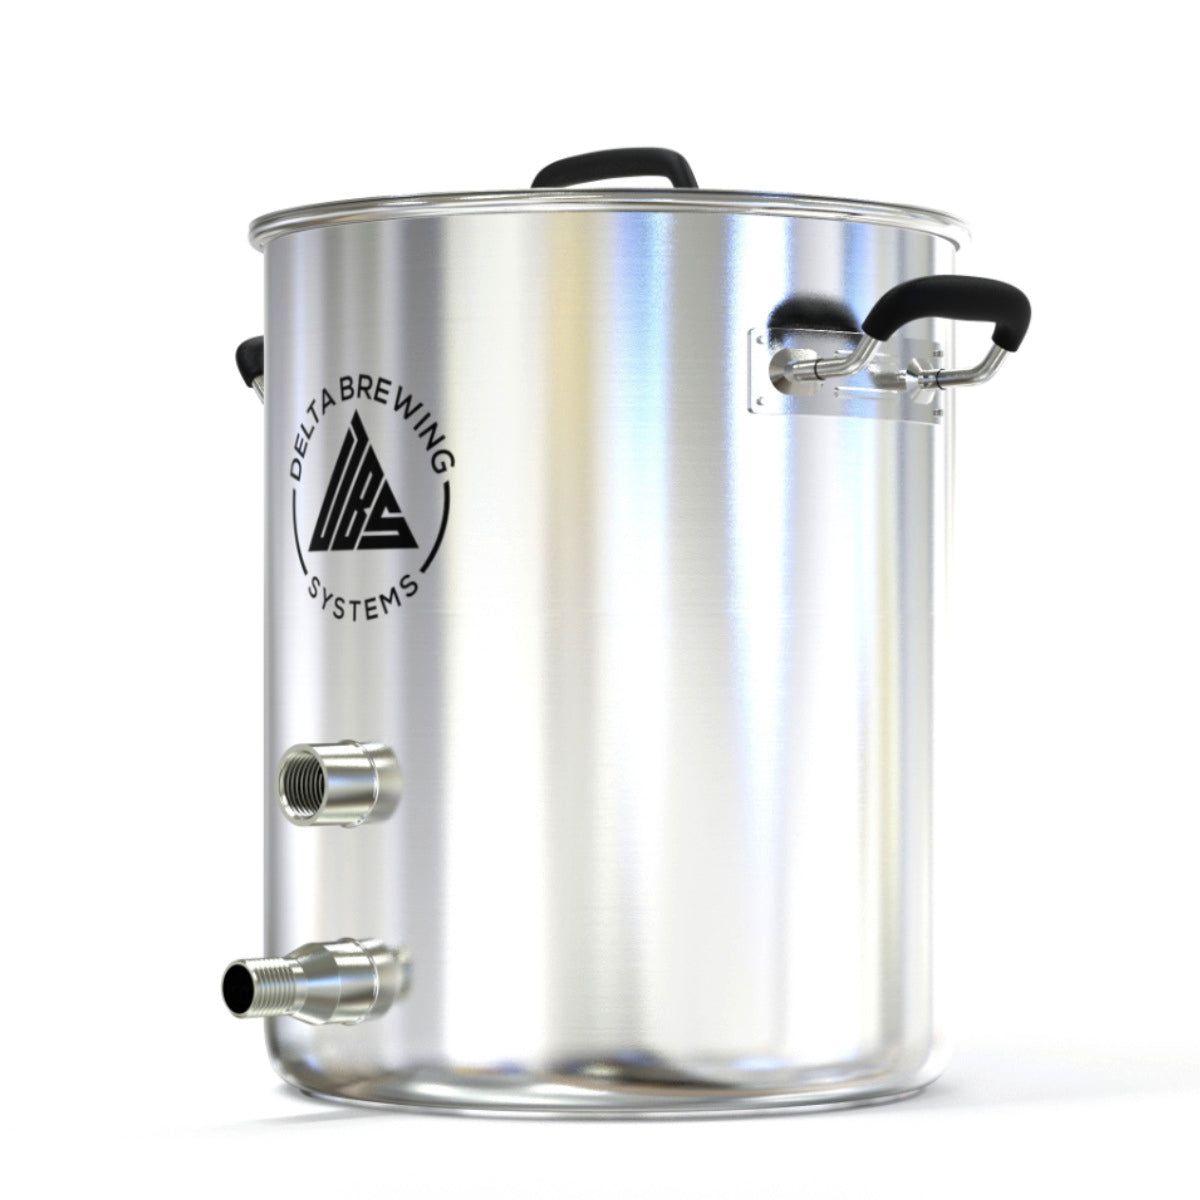 The Brew Kettle - 15 Gallon - Delta Brewing Systems